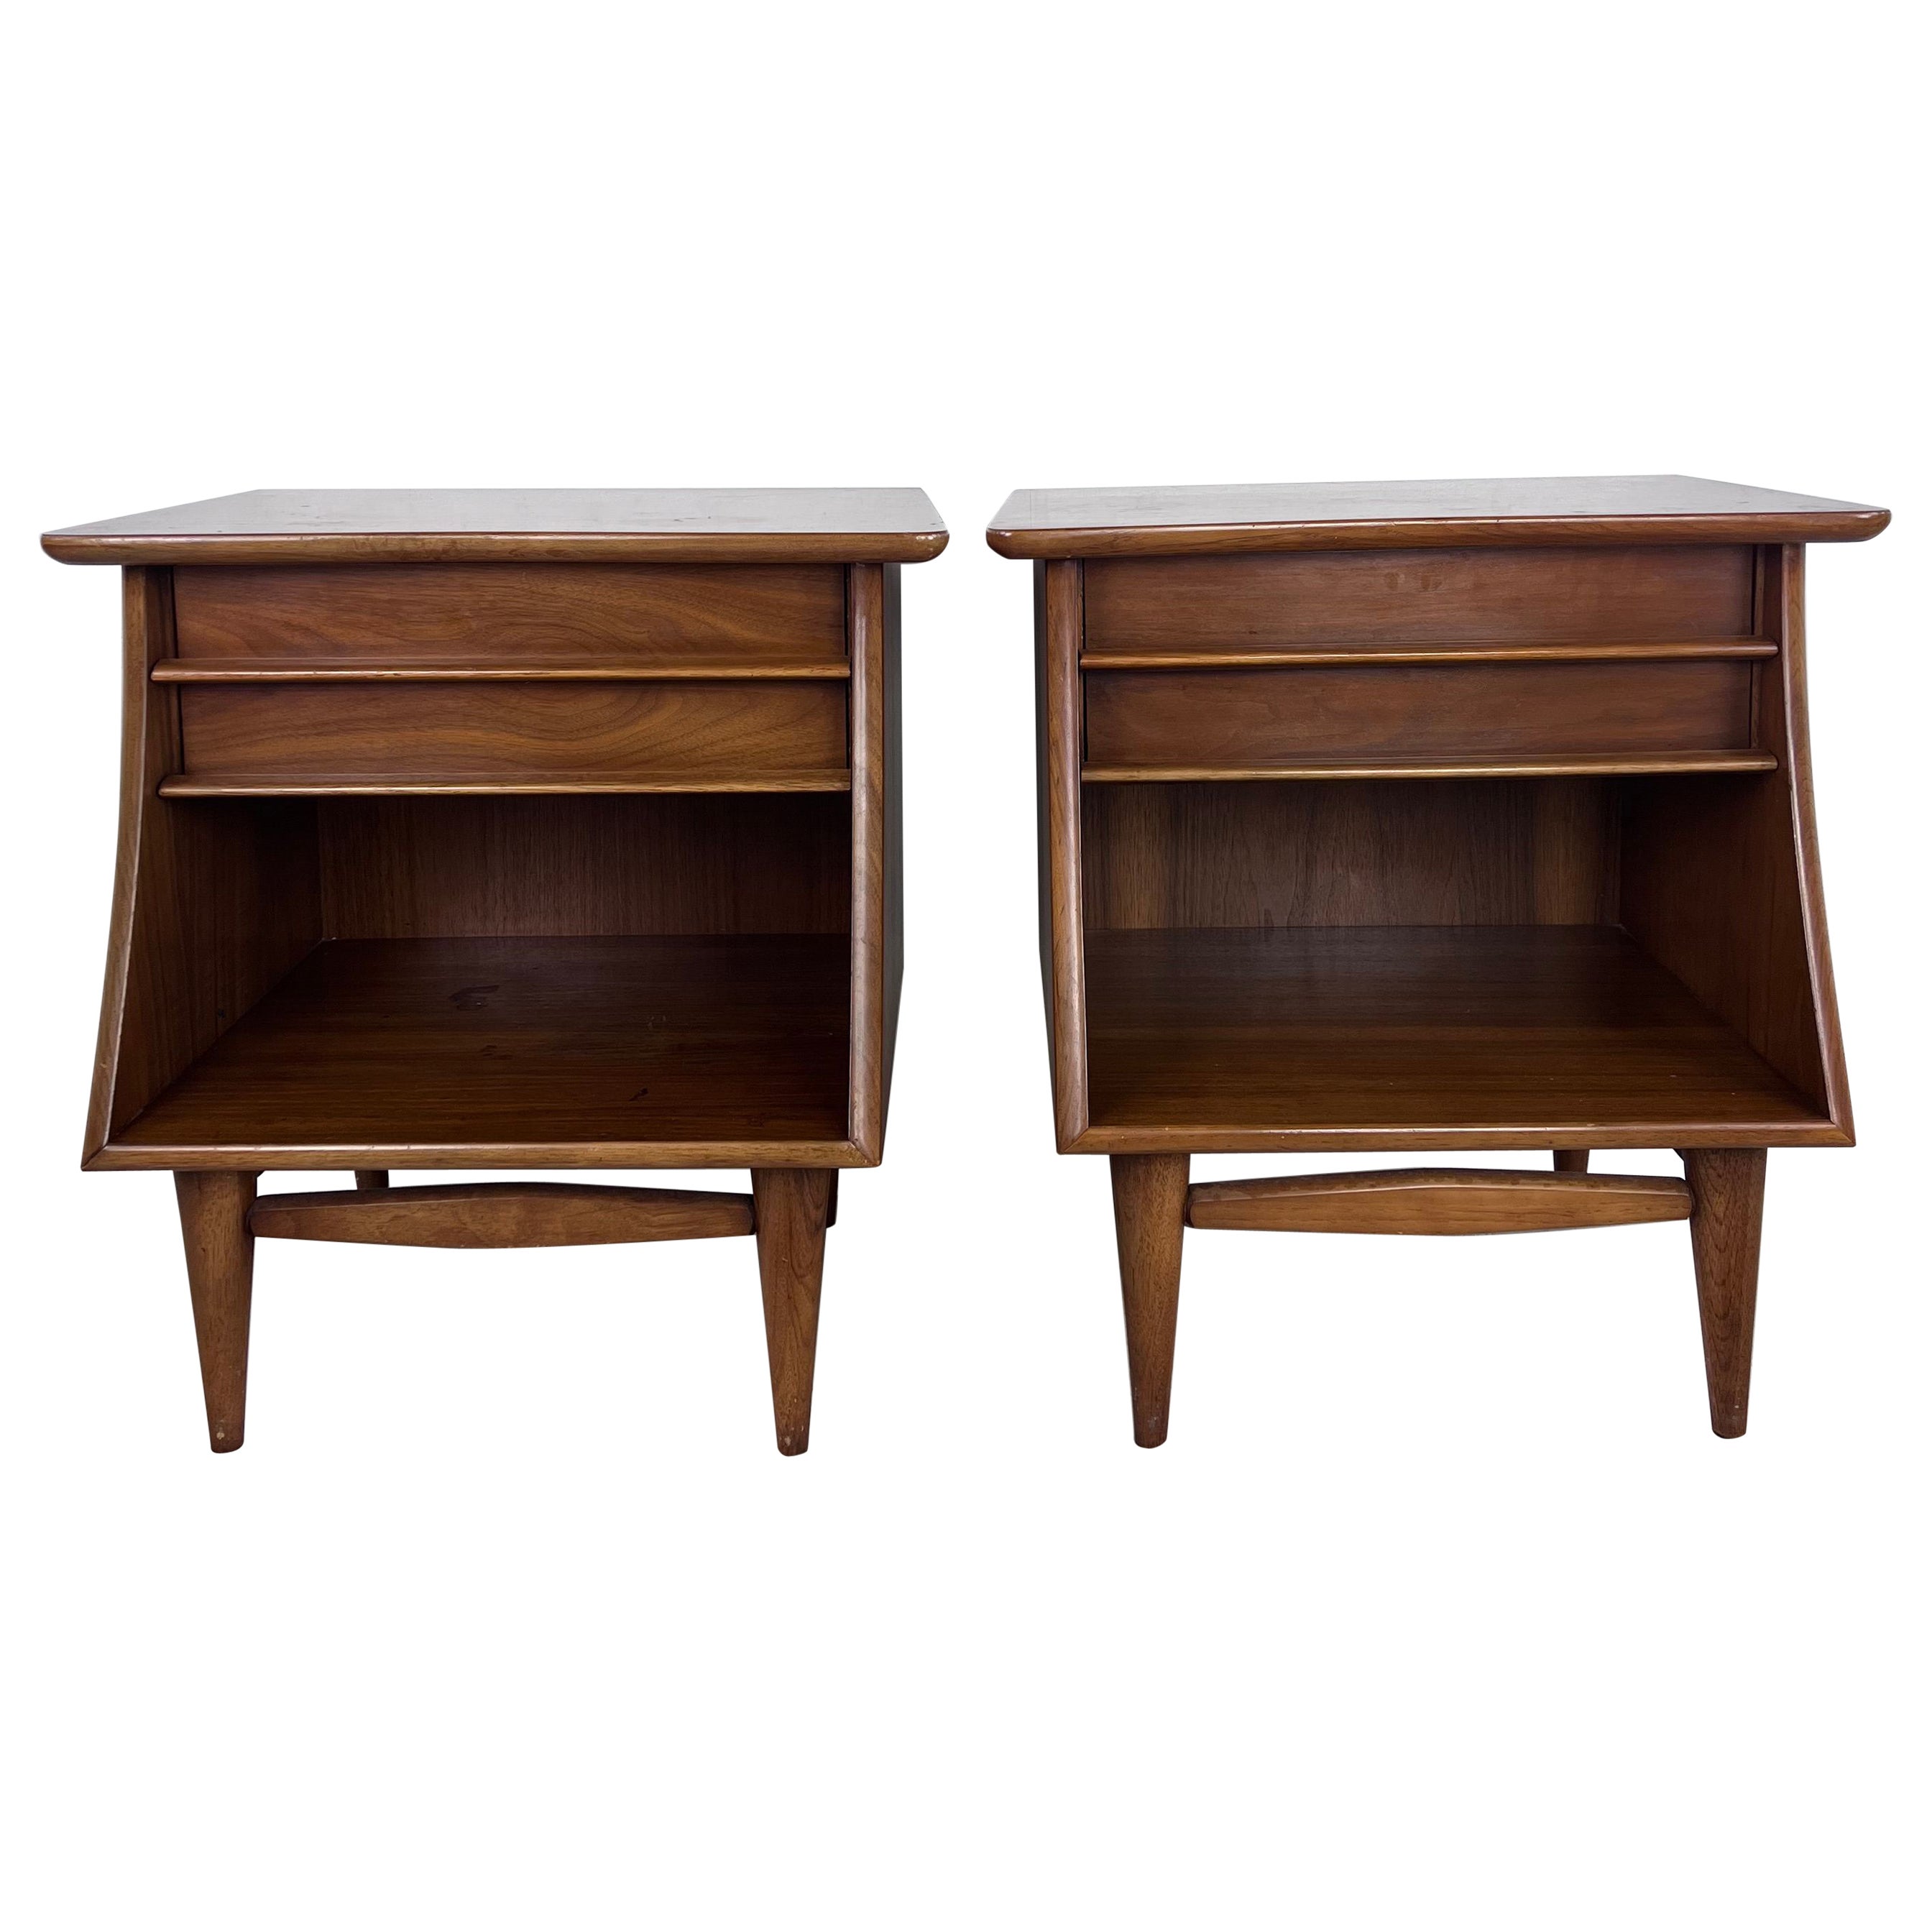 Mid Century Modern Nightstands The Foreteller by Kent Coffey - A Pair